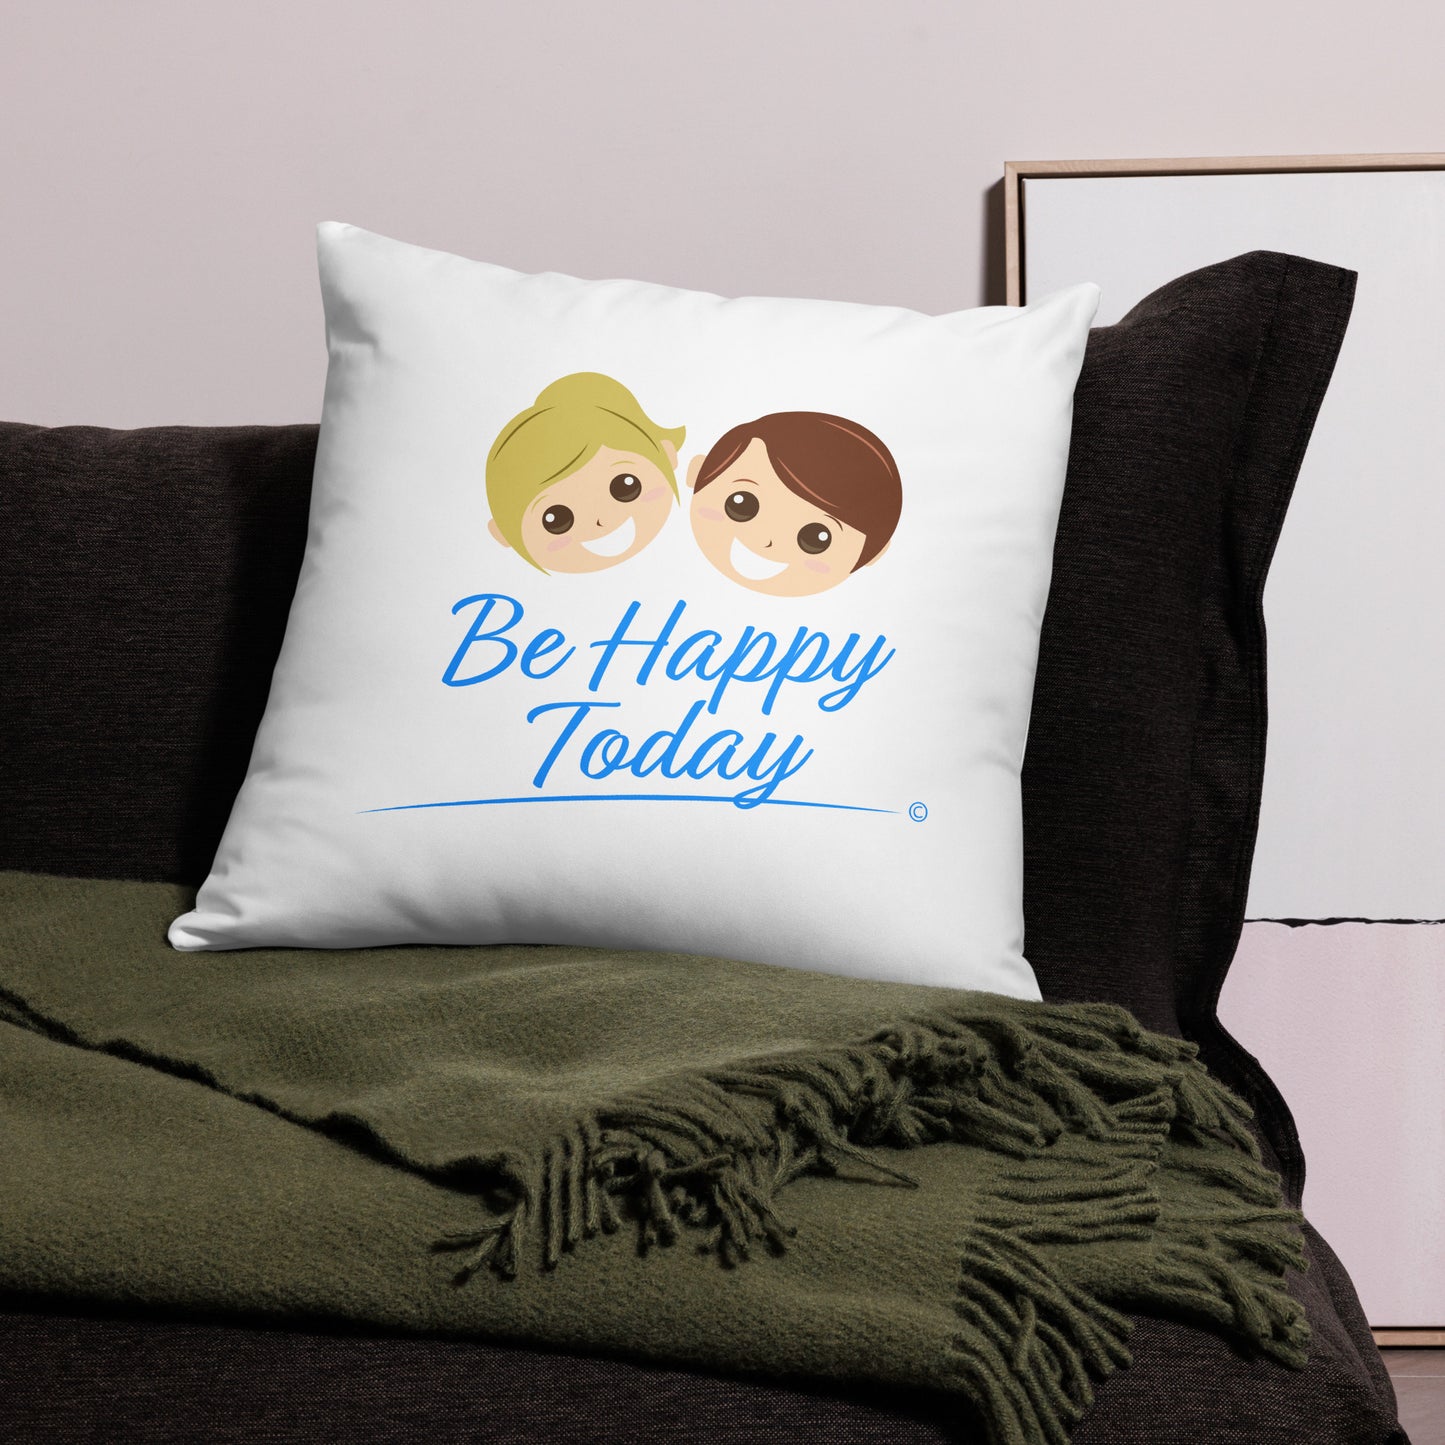 Optimistic 22x22 throw pillow featuring the uplifting phrase 'Be Happy Today,' making a statement on a black bed with a lively green scarf.